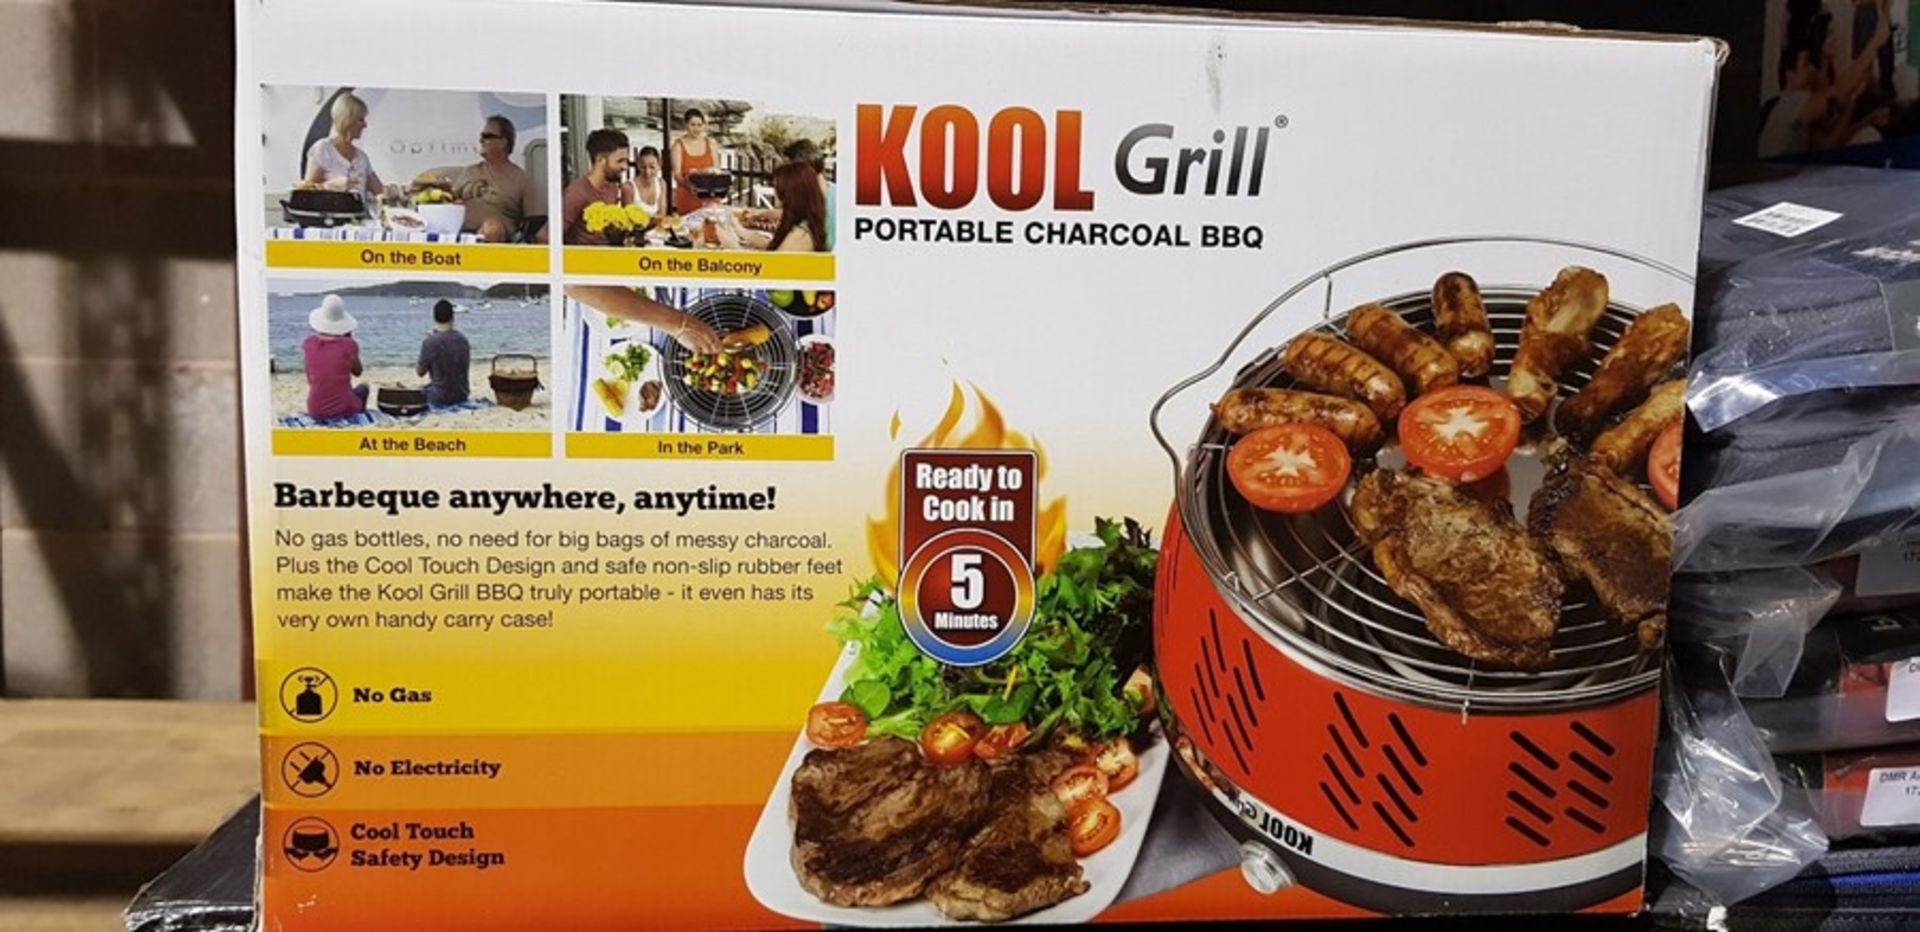 1 KOOL GRILL PORTABLE CHARCOAL BBQ (VIEWING HIGHLY RECOMMENDED)